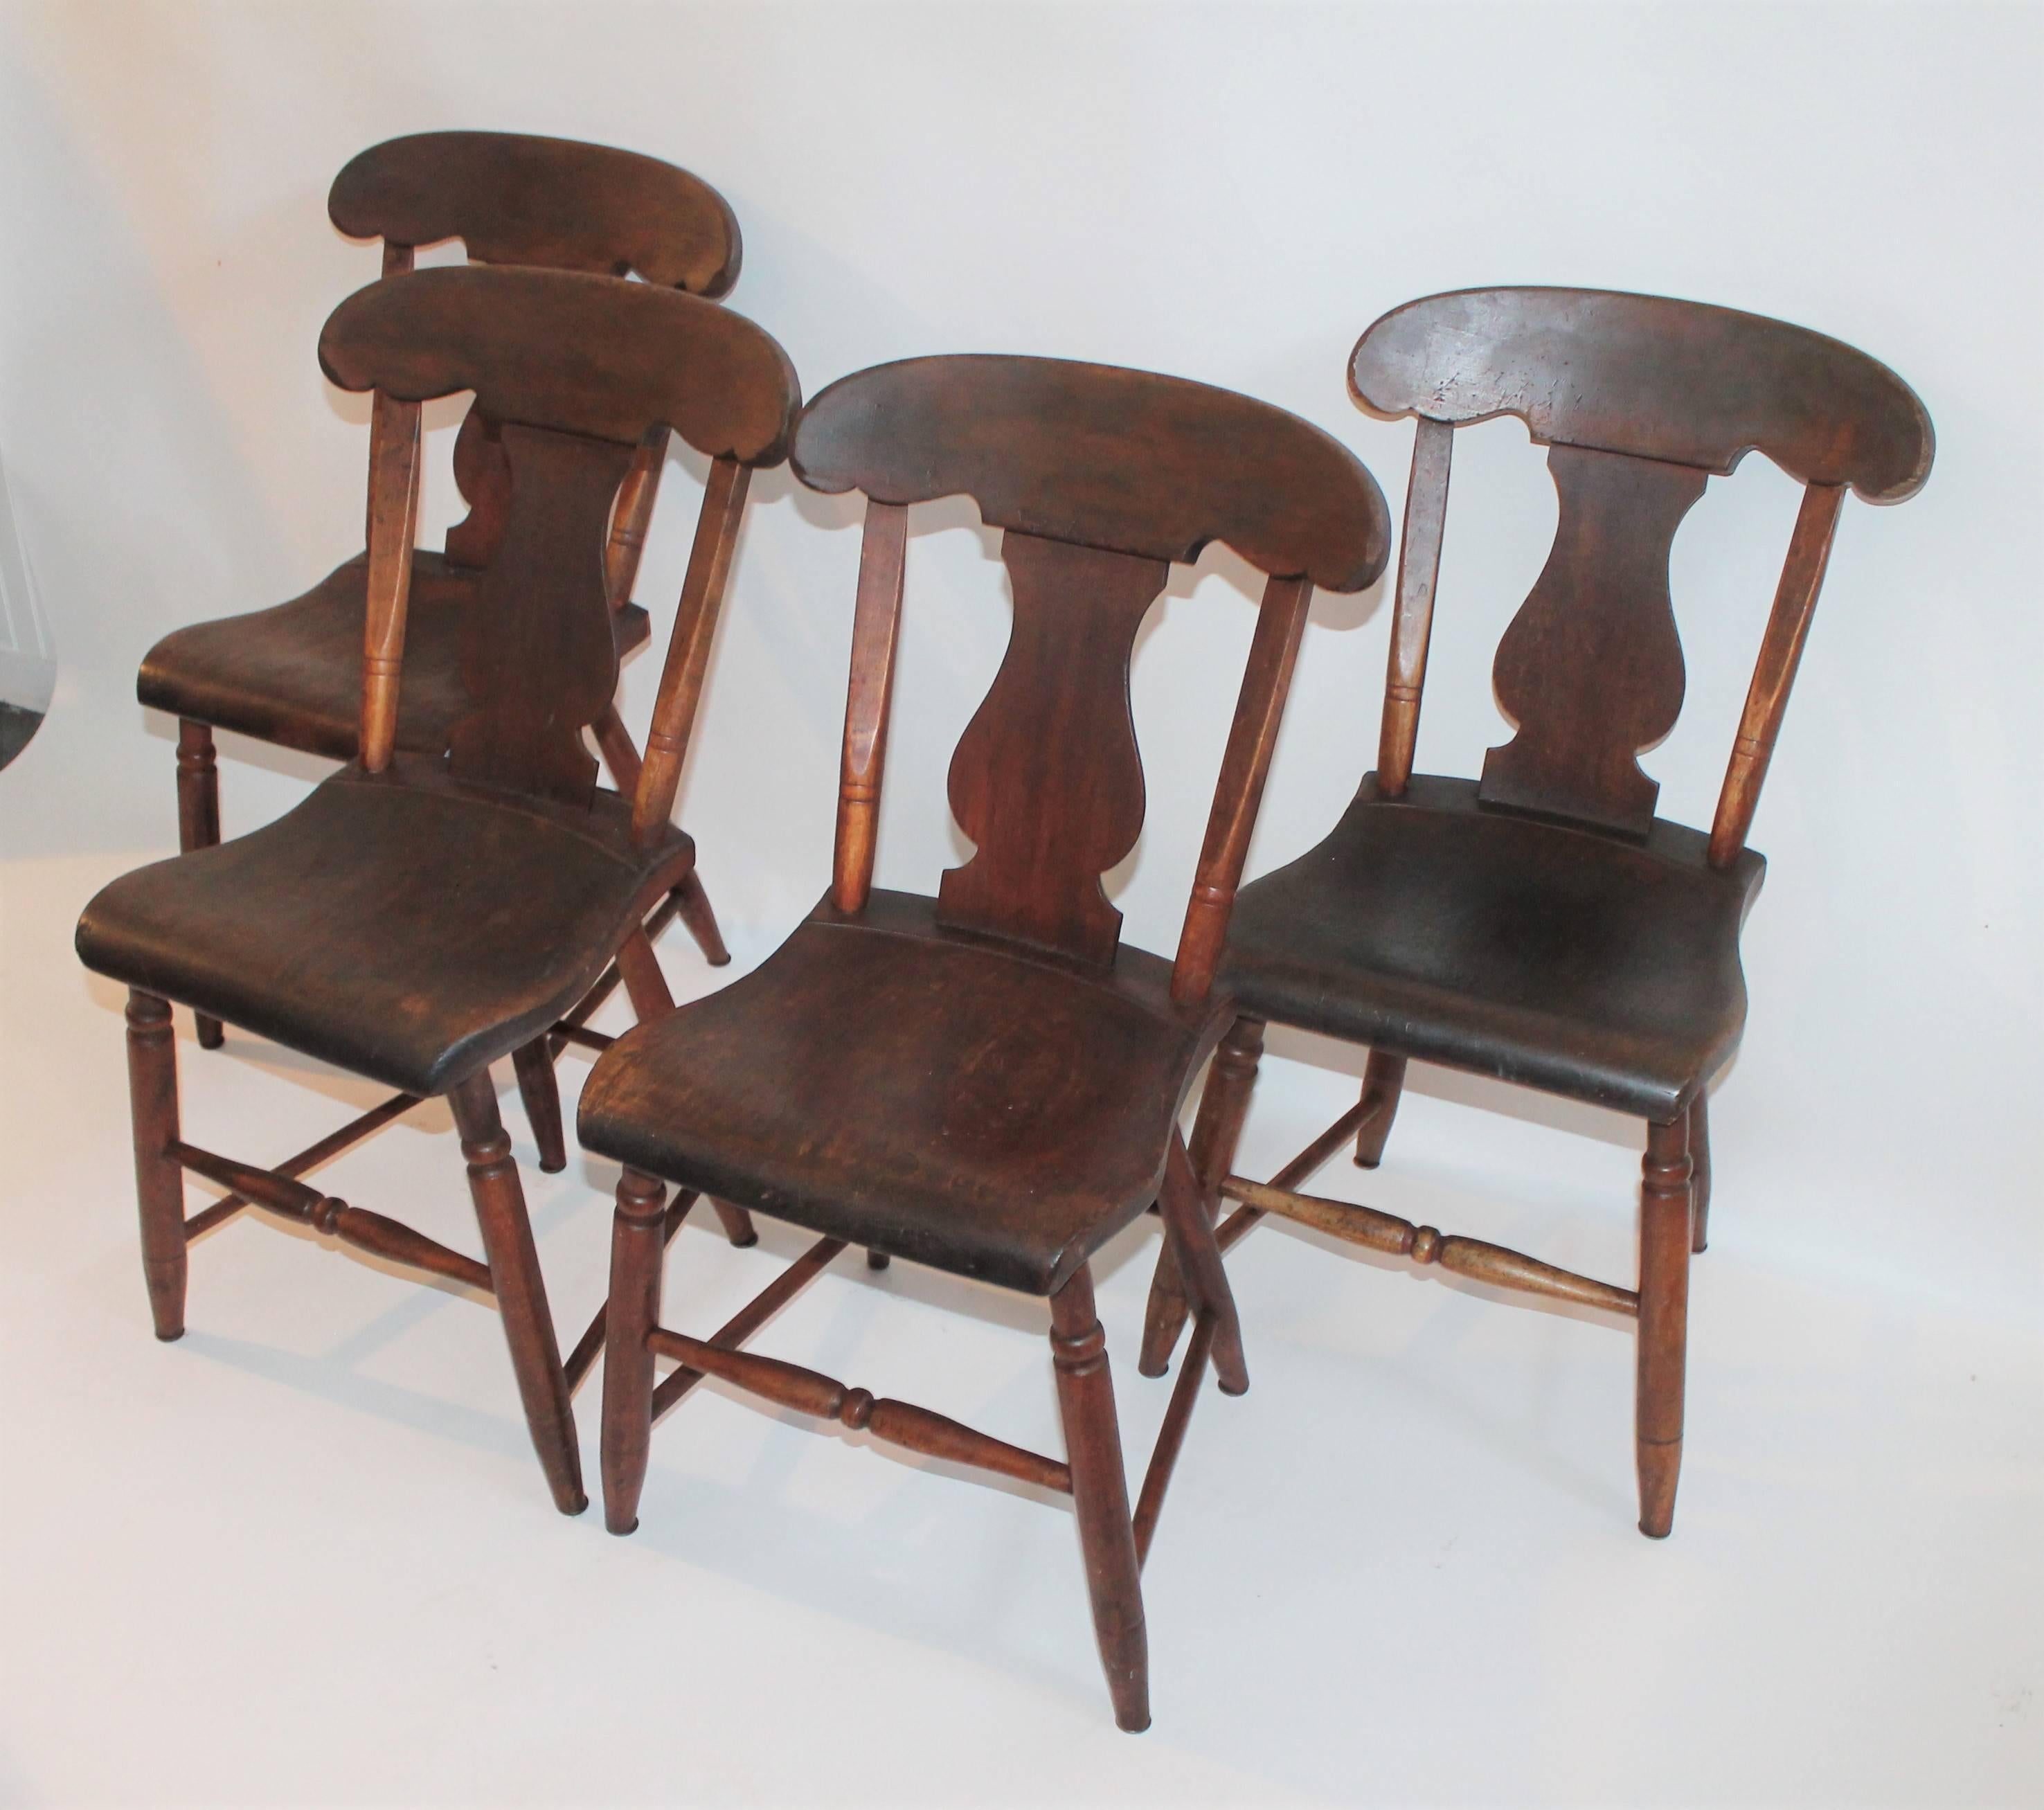 This nice early set of worn salmon painted chairs are from PA and are super comfortable. They have a nice mellow patina. The condition is very good.